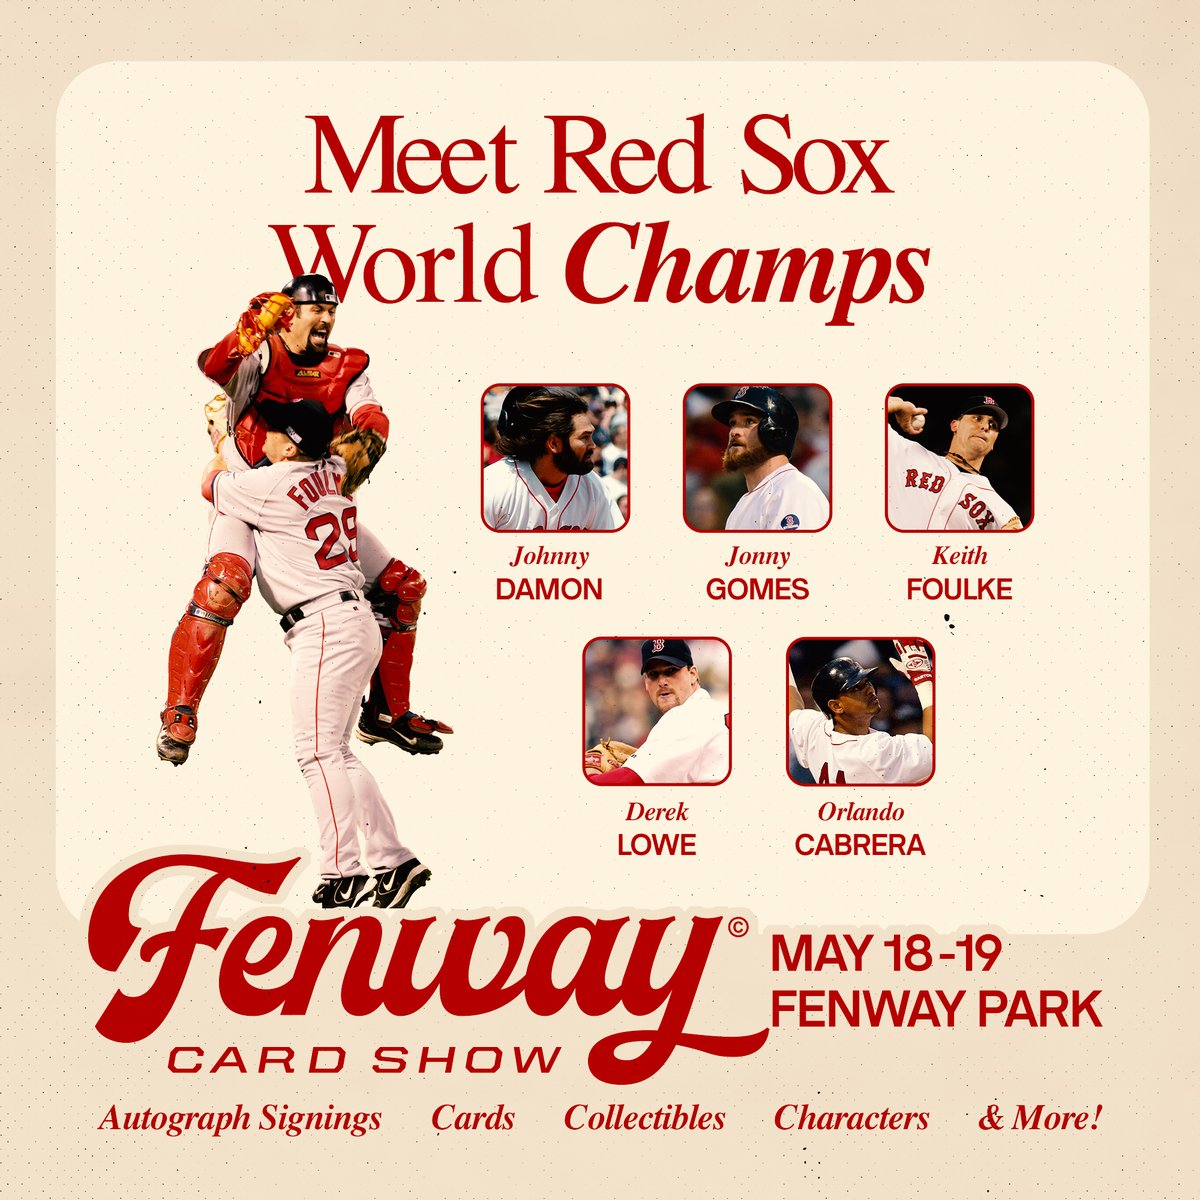 The Fenway Card show is almost here! 

Grab your tickets for this weekend: 
redsox.com/fenwaycardshow